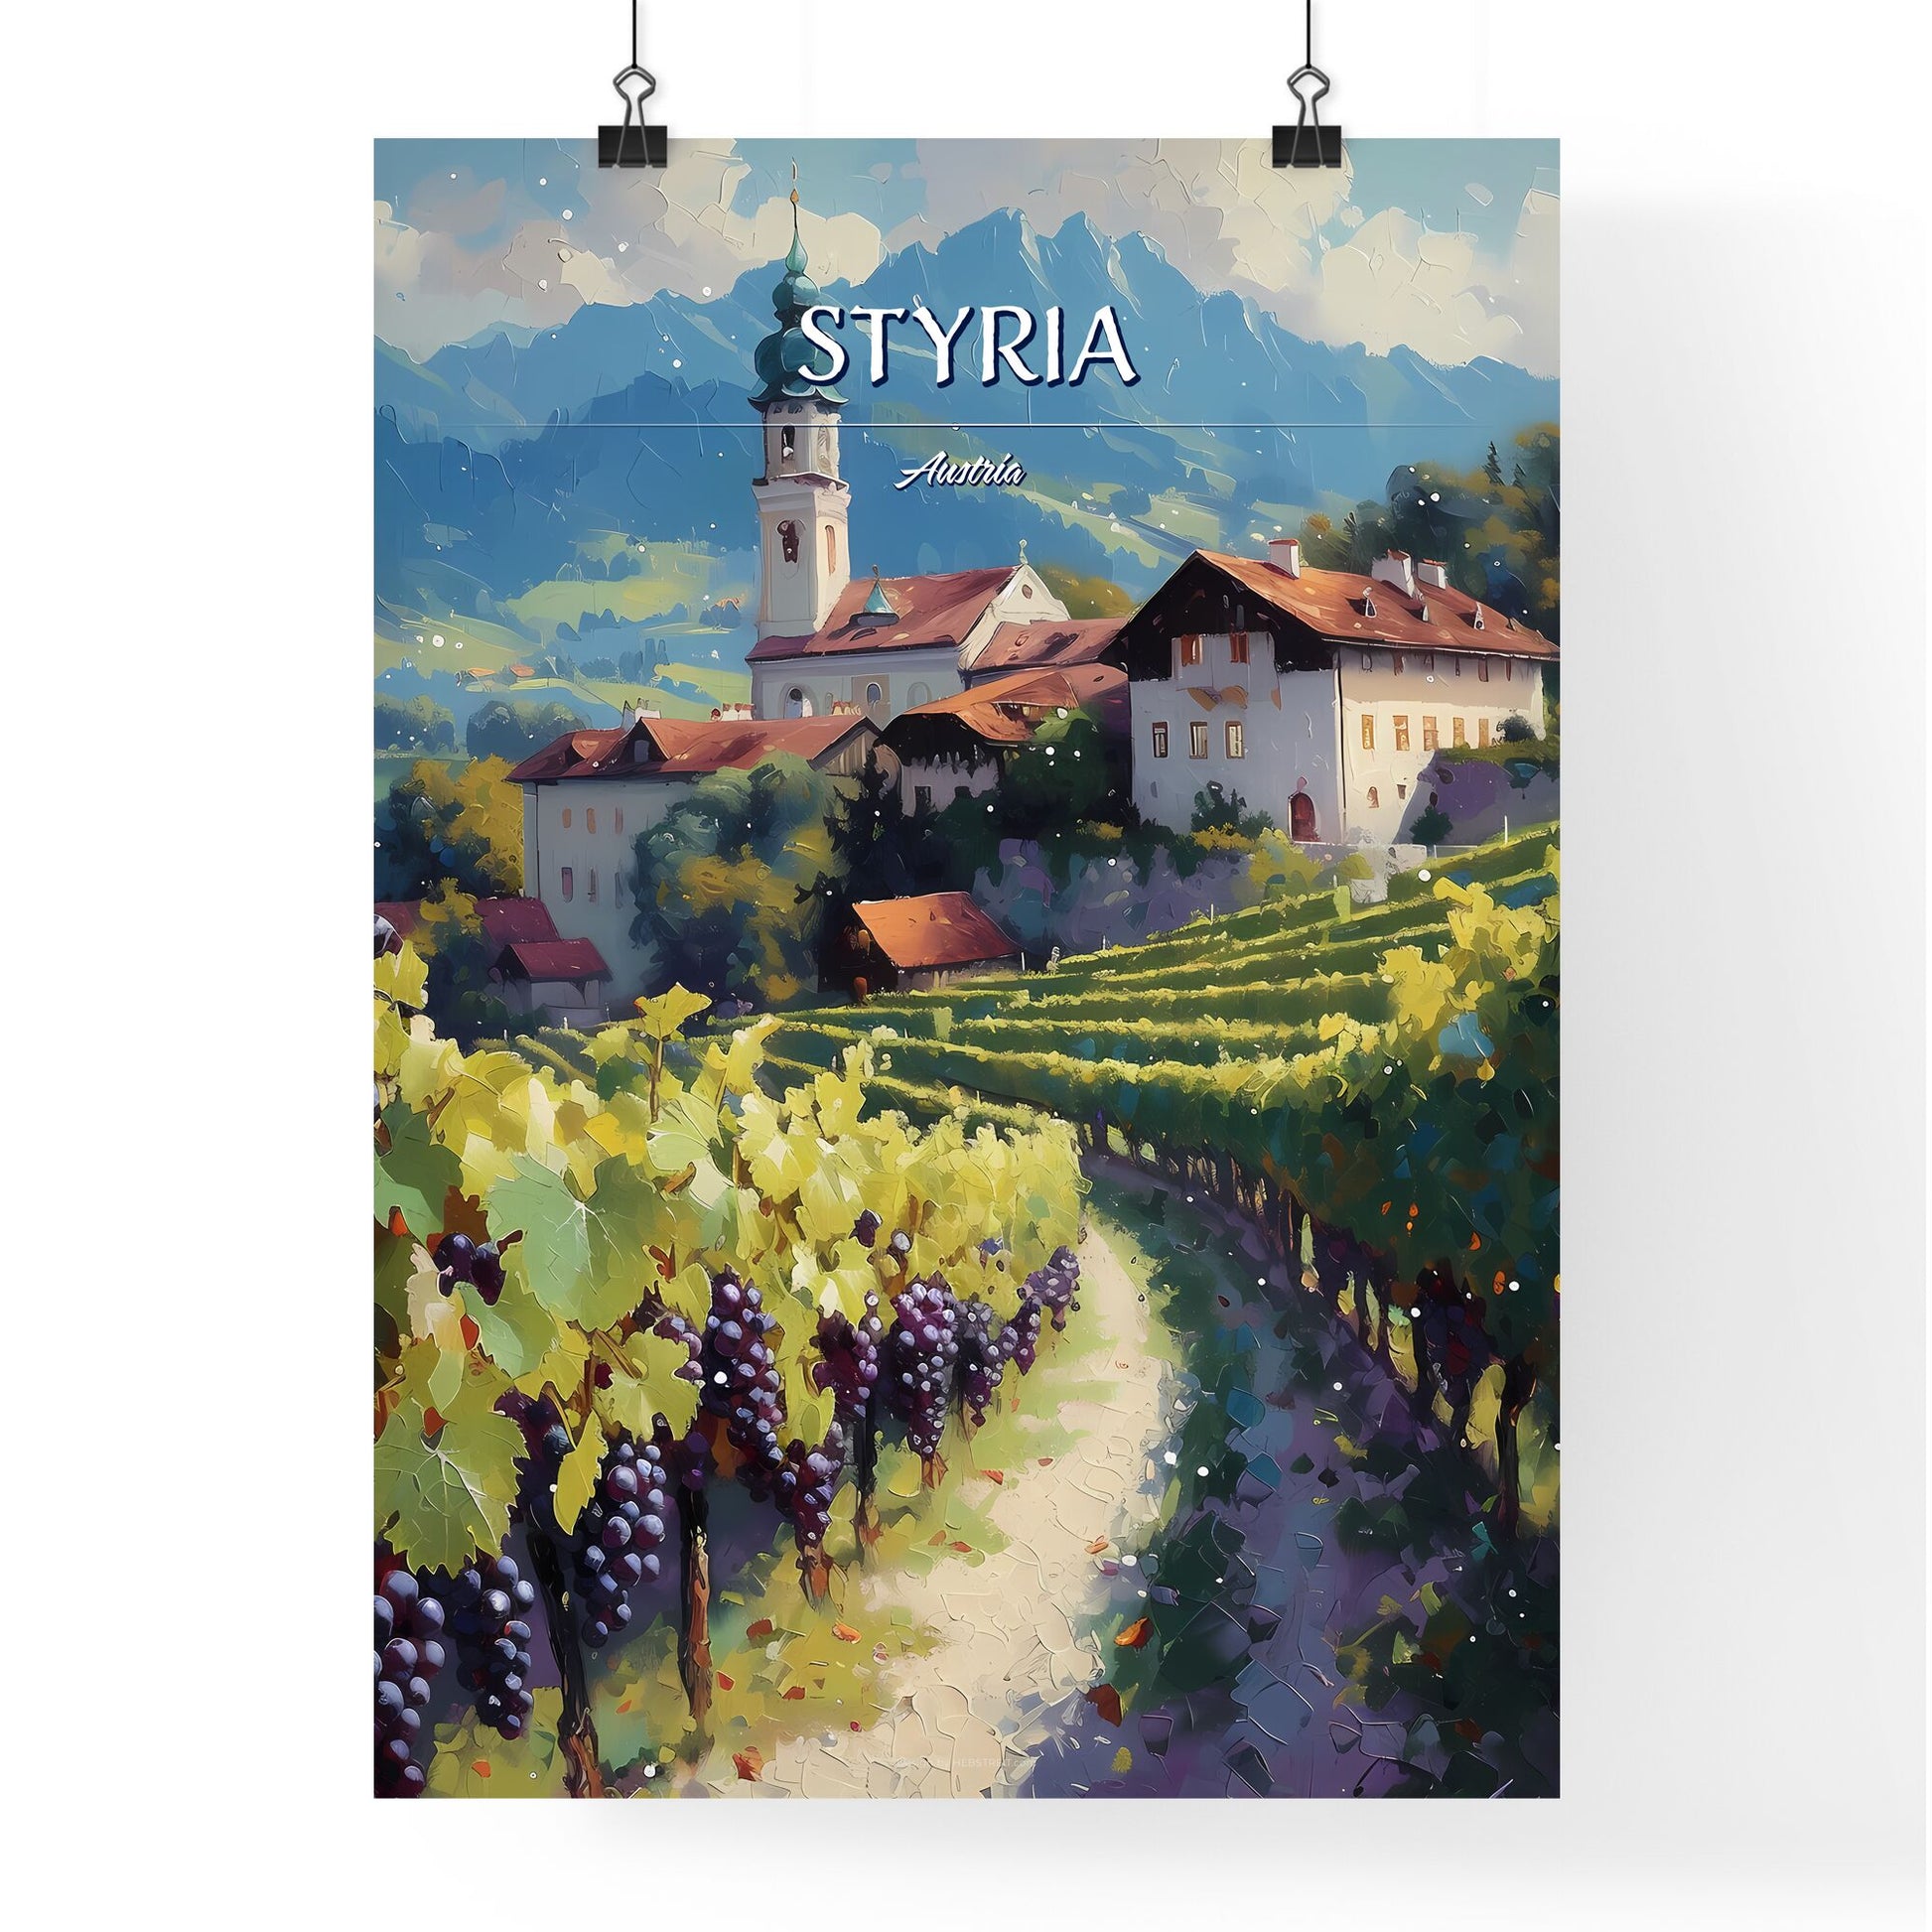 Styria, Austria - Art print of a painting of a village by a lake with fall colors Default Title